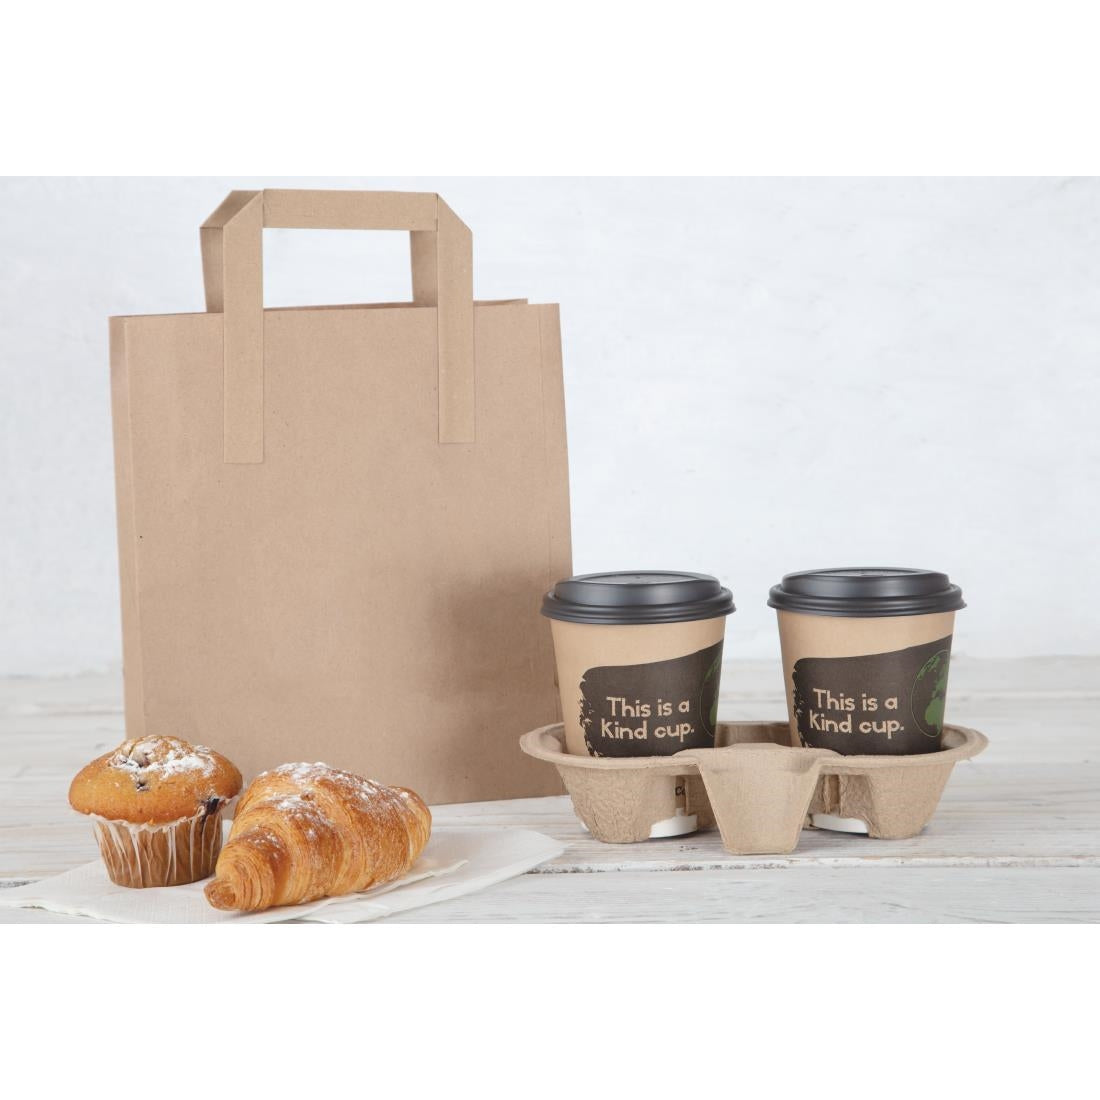 CF591 Fiesta Recyclable Brown Paper Carrier Bags Medium (Pack of 250) JD Catering Equipment Solutions Ltd